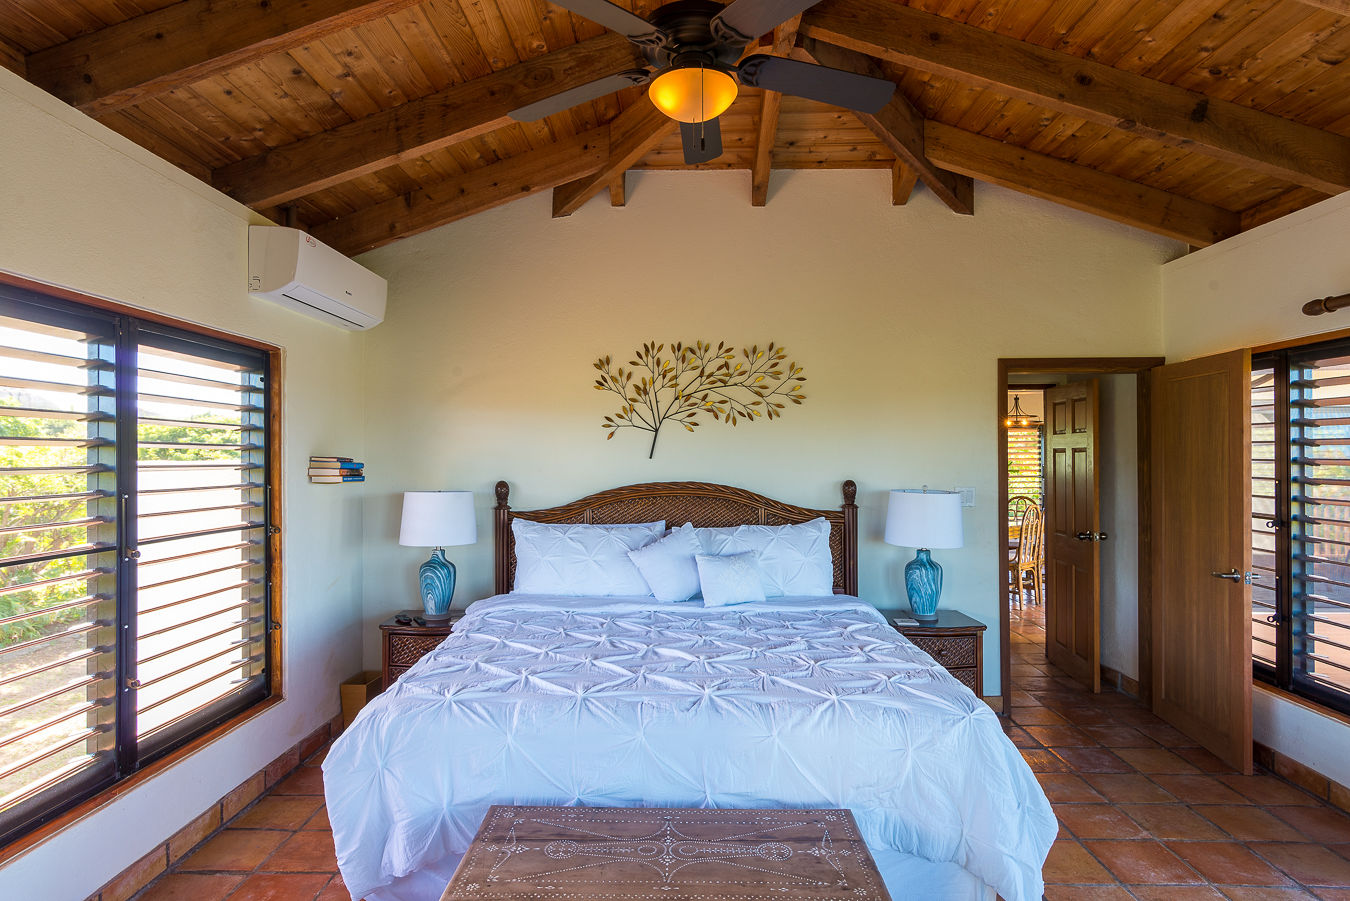 Amani Villa master bedroom with a king bed, natural hues, tile floors and a lofted wood-beam ceiling with a fan light.